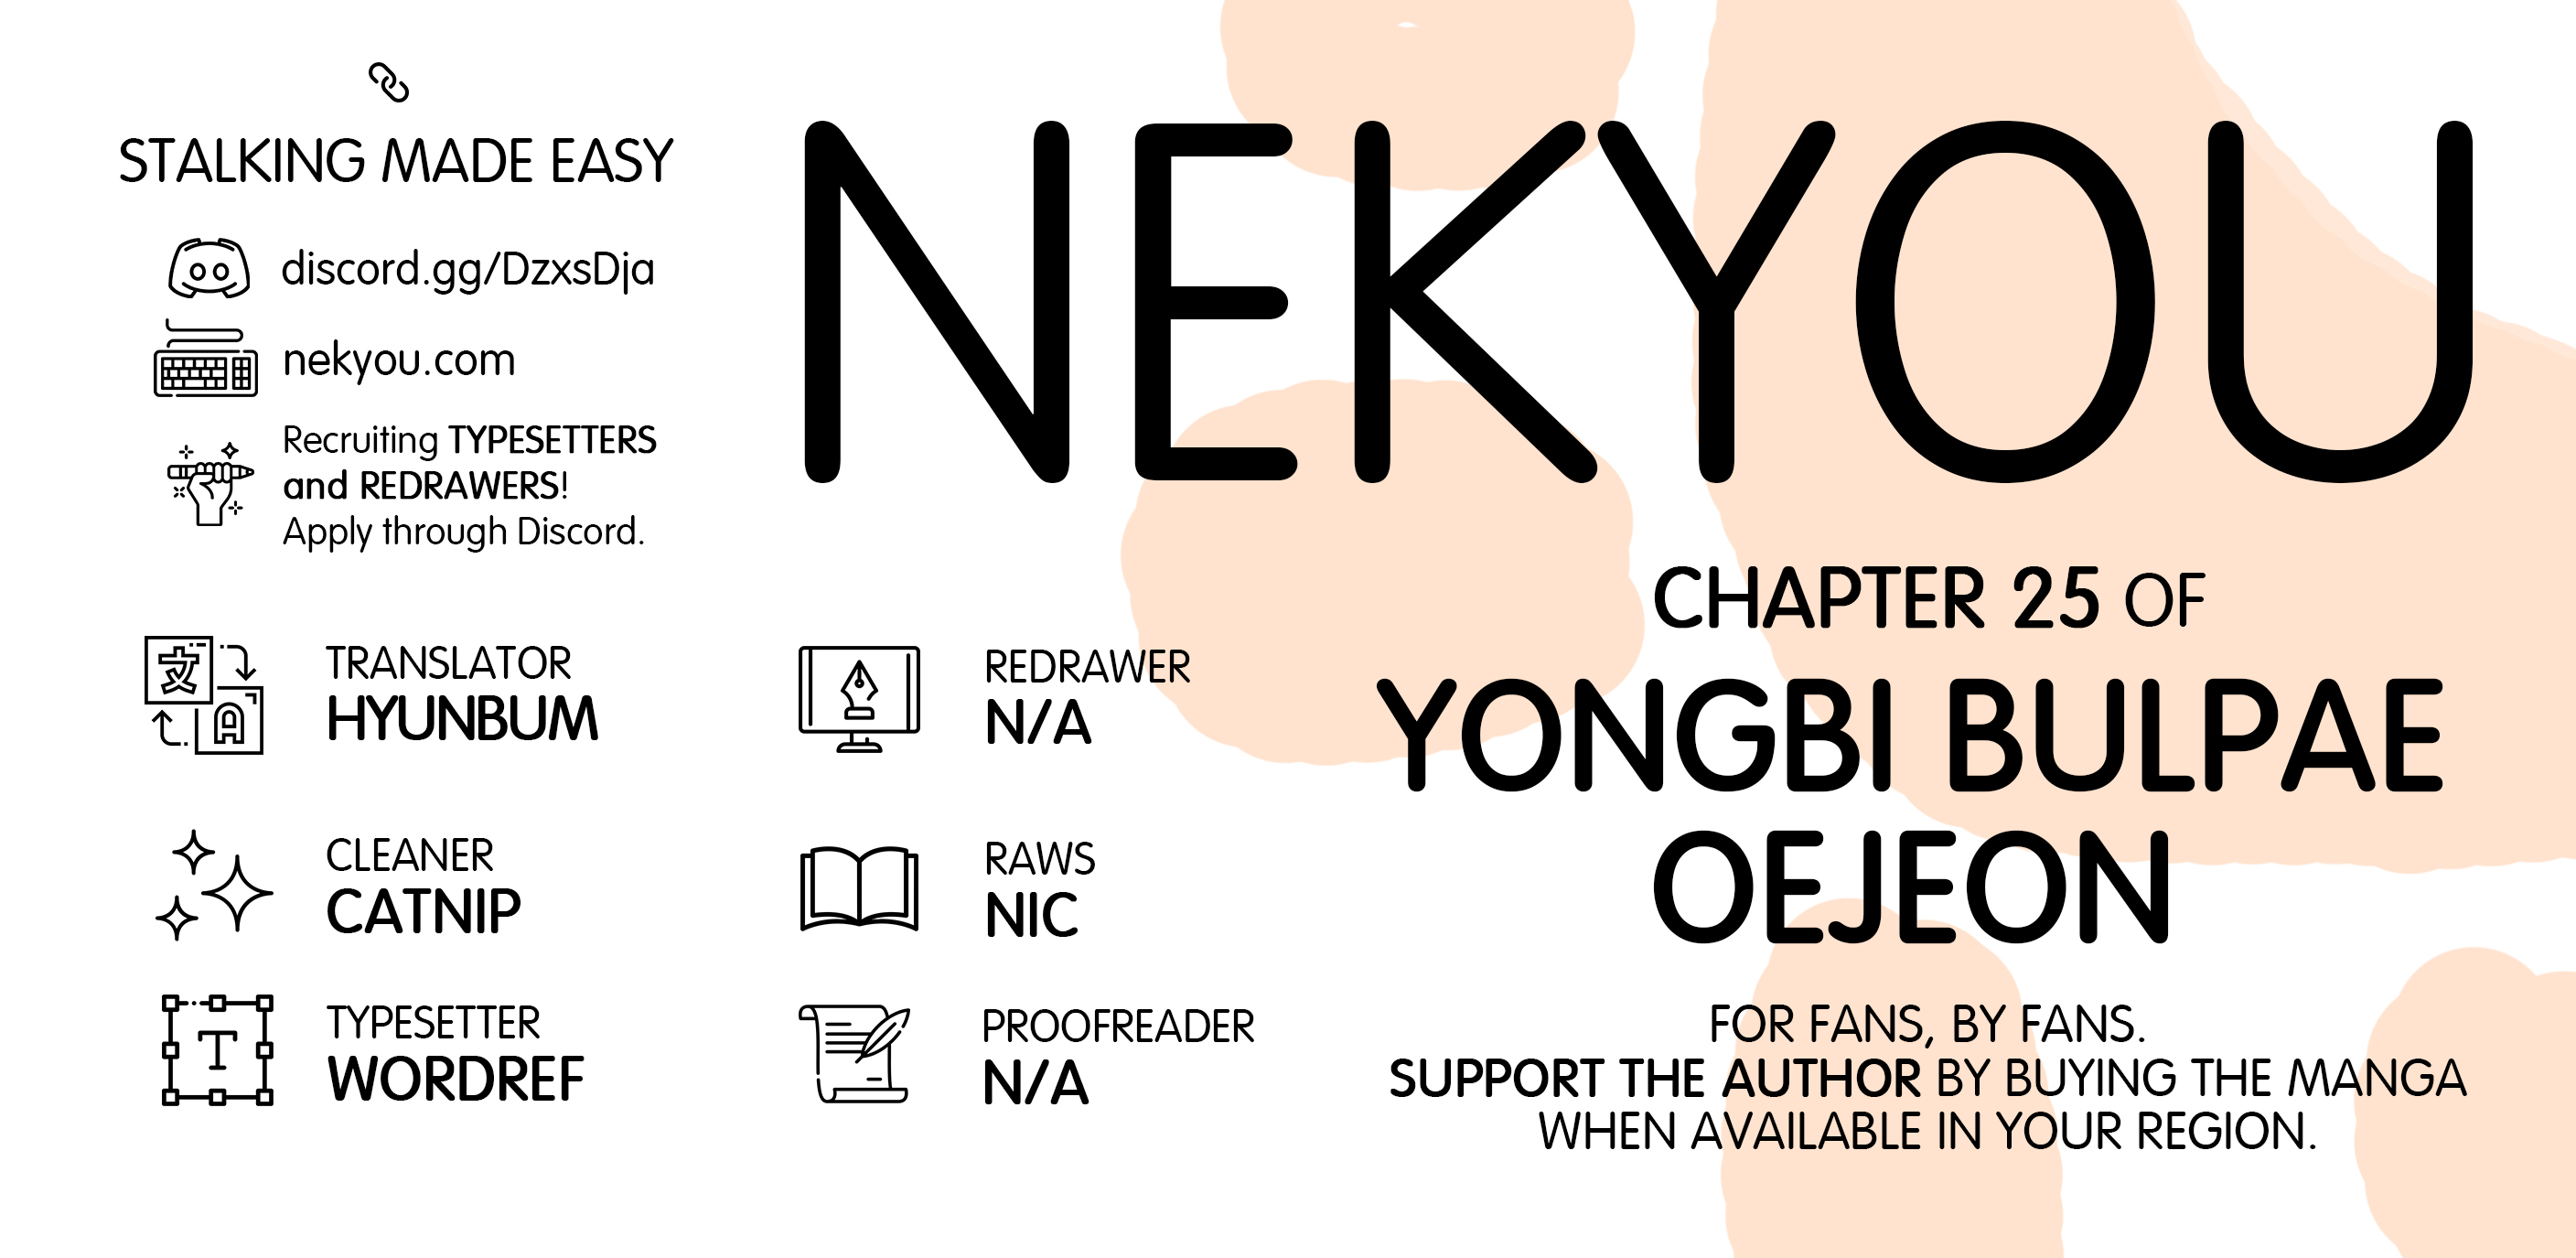 Yongbi the Invincible - A Side Story Chapter 25